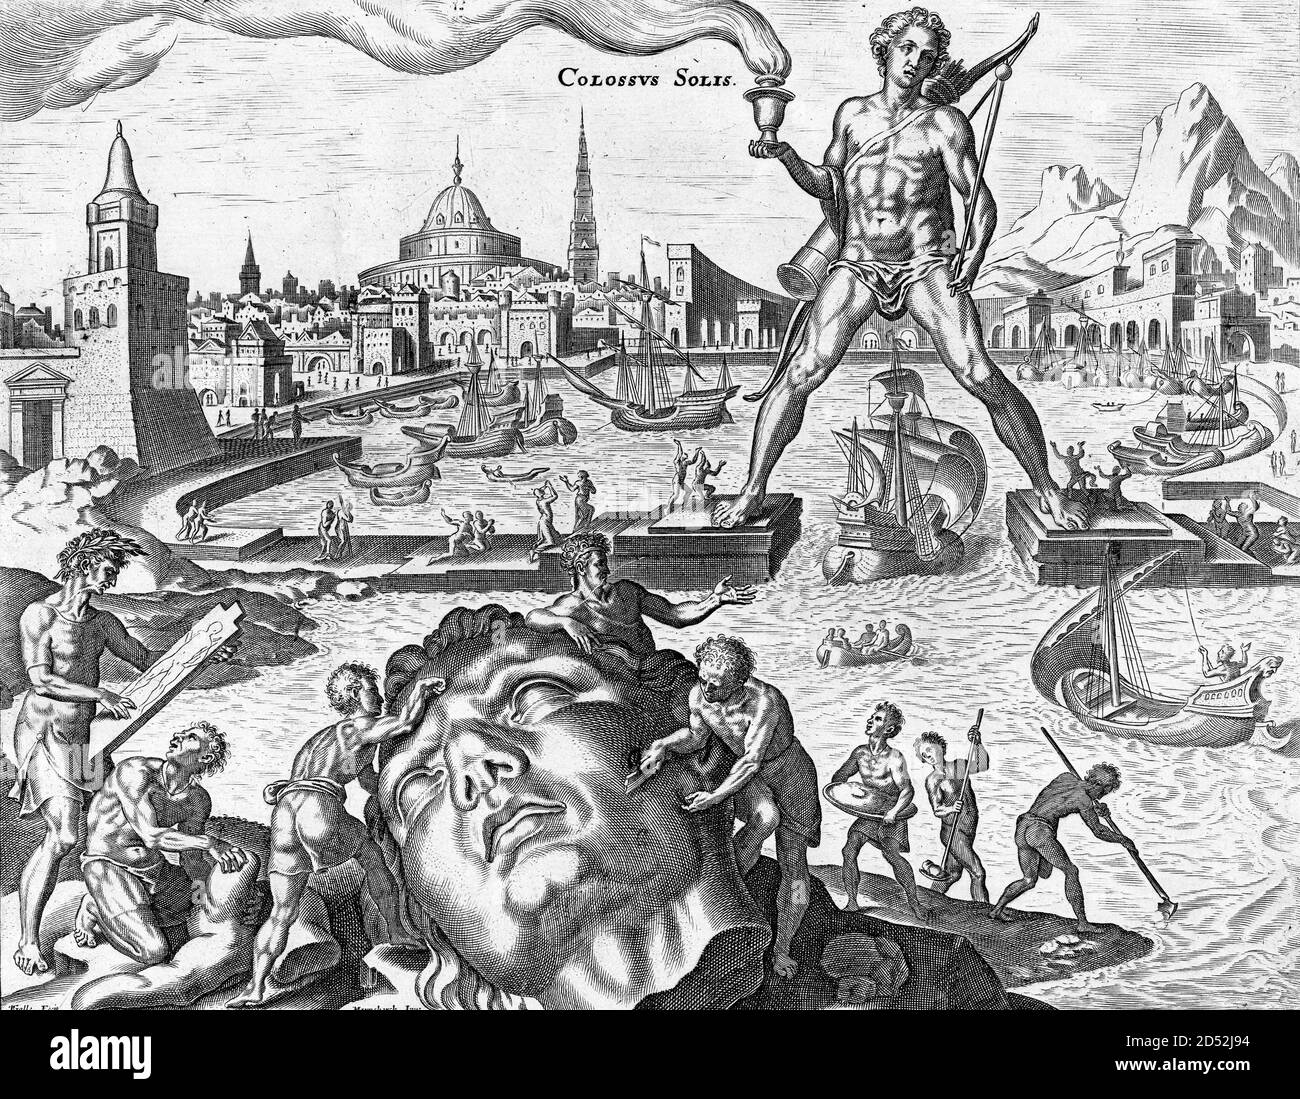 Colossus of Rhodes, engraving by Philips Galle from artwork by Maarten van Heemskerck, 16th century Stock Photo